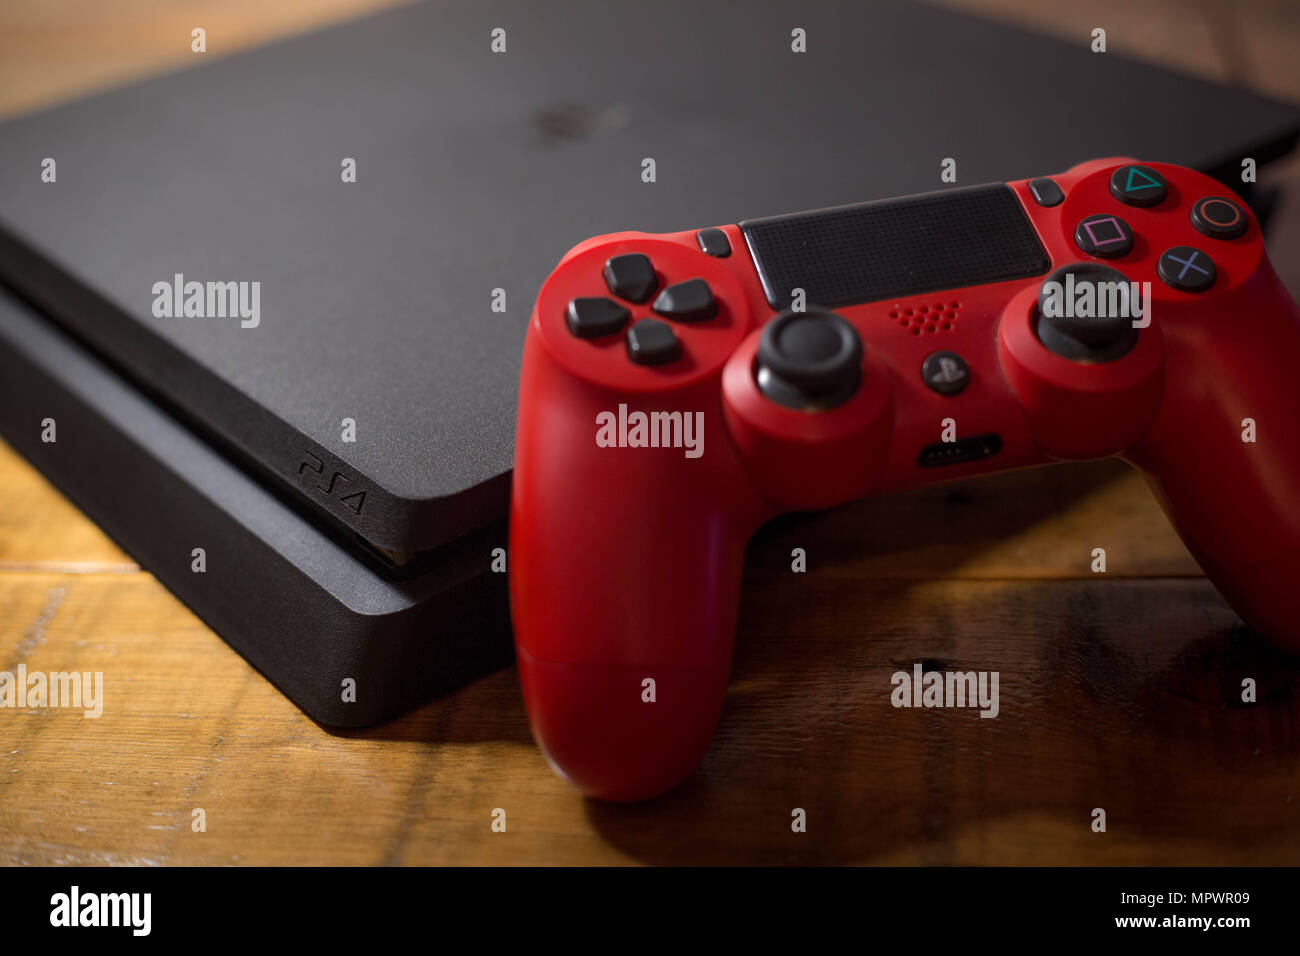 A Sony PlayStation 4 video game console with a red wireless controller next  to it. The PlayStation 4 or PS4 is knows as the eighth generation of home  video game console developed